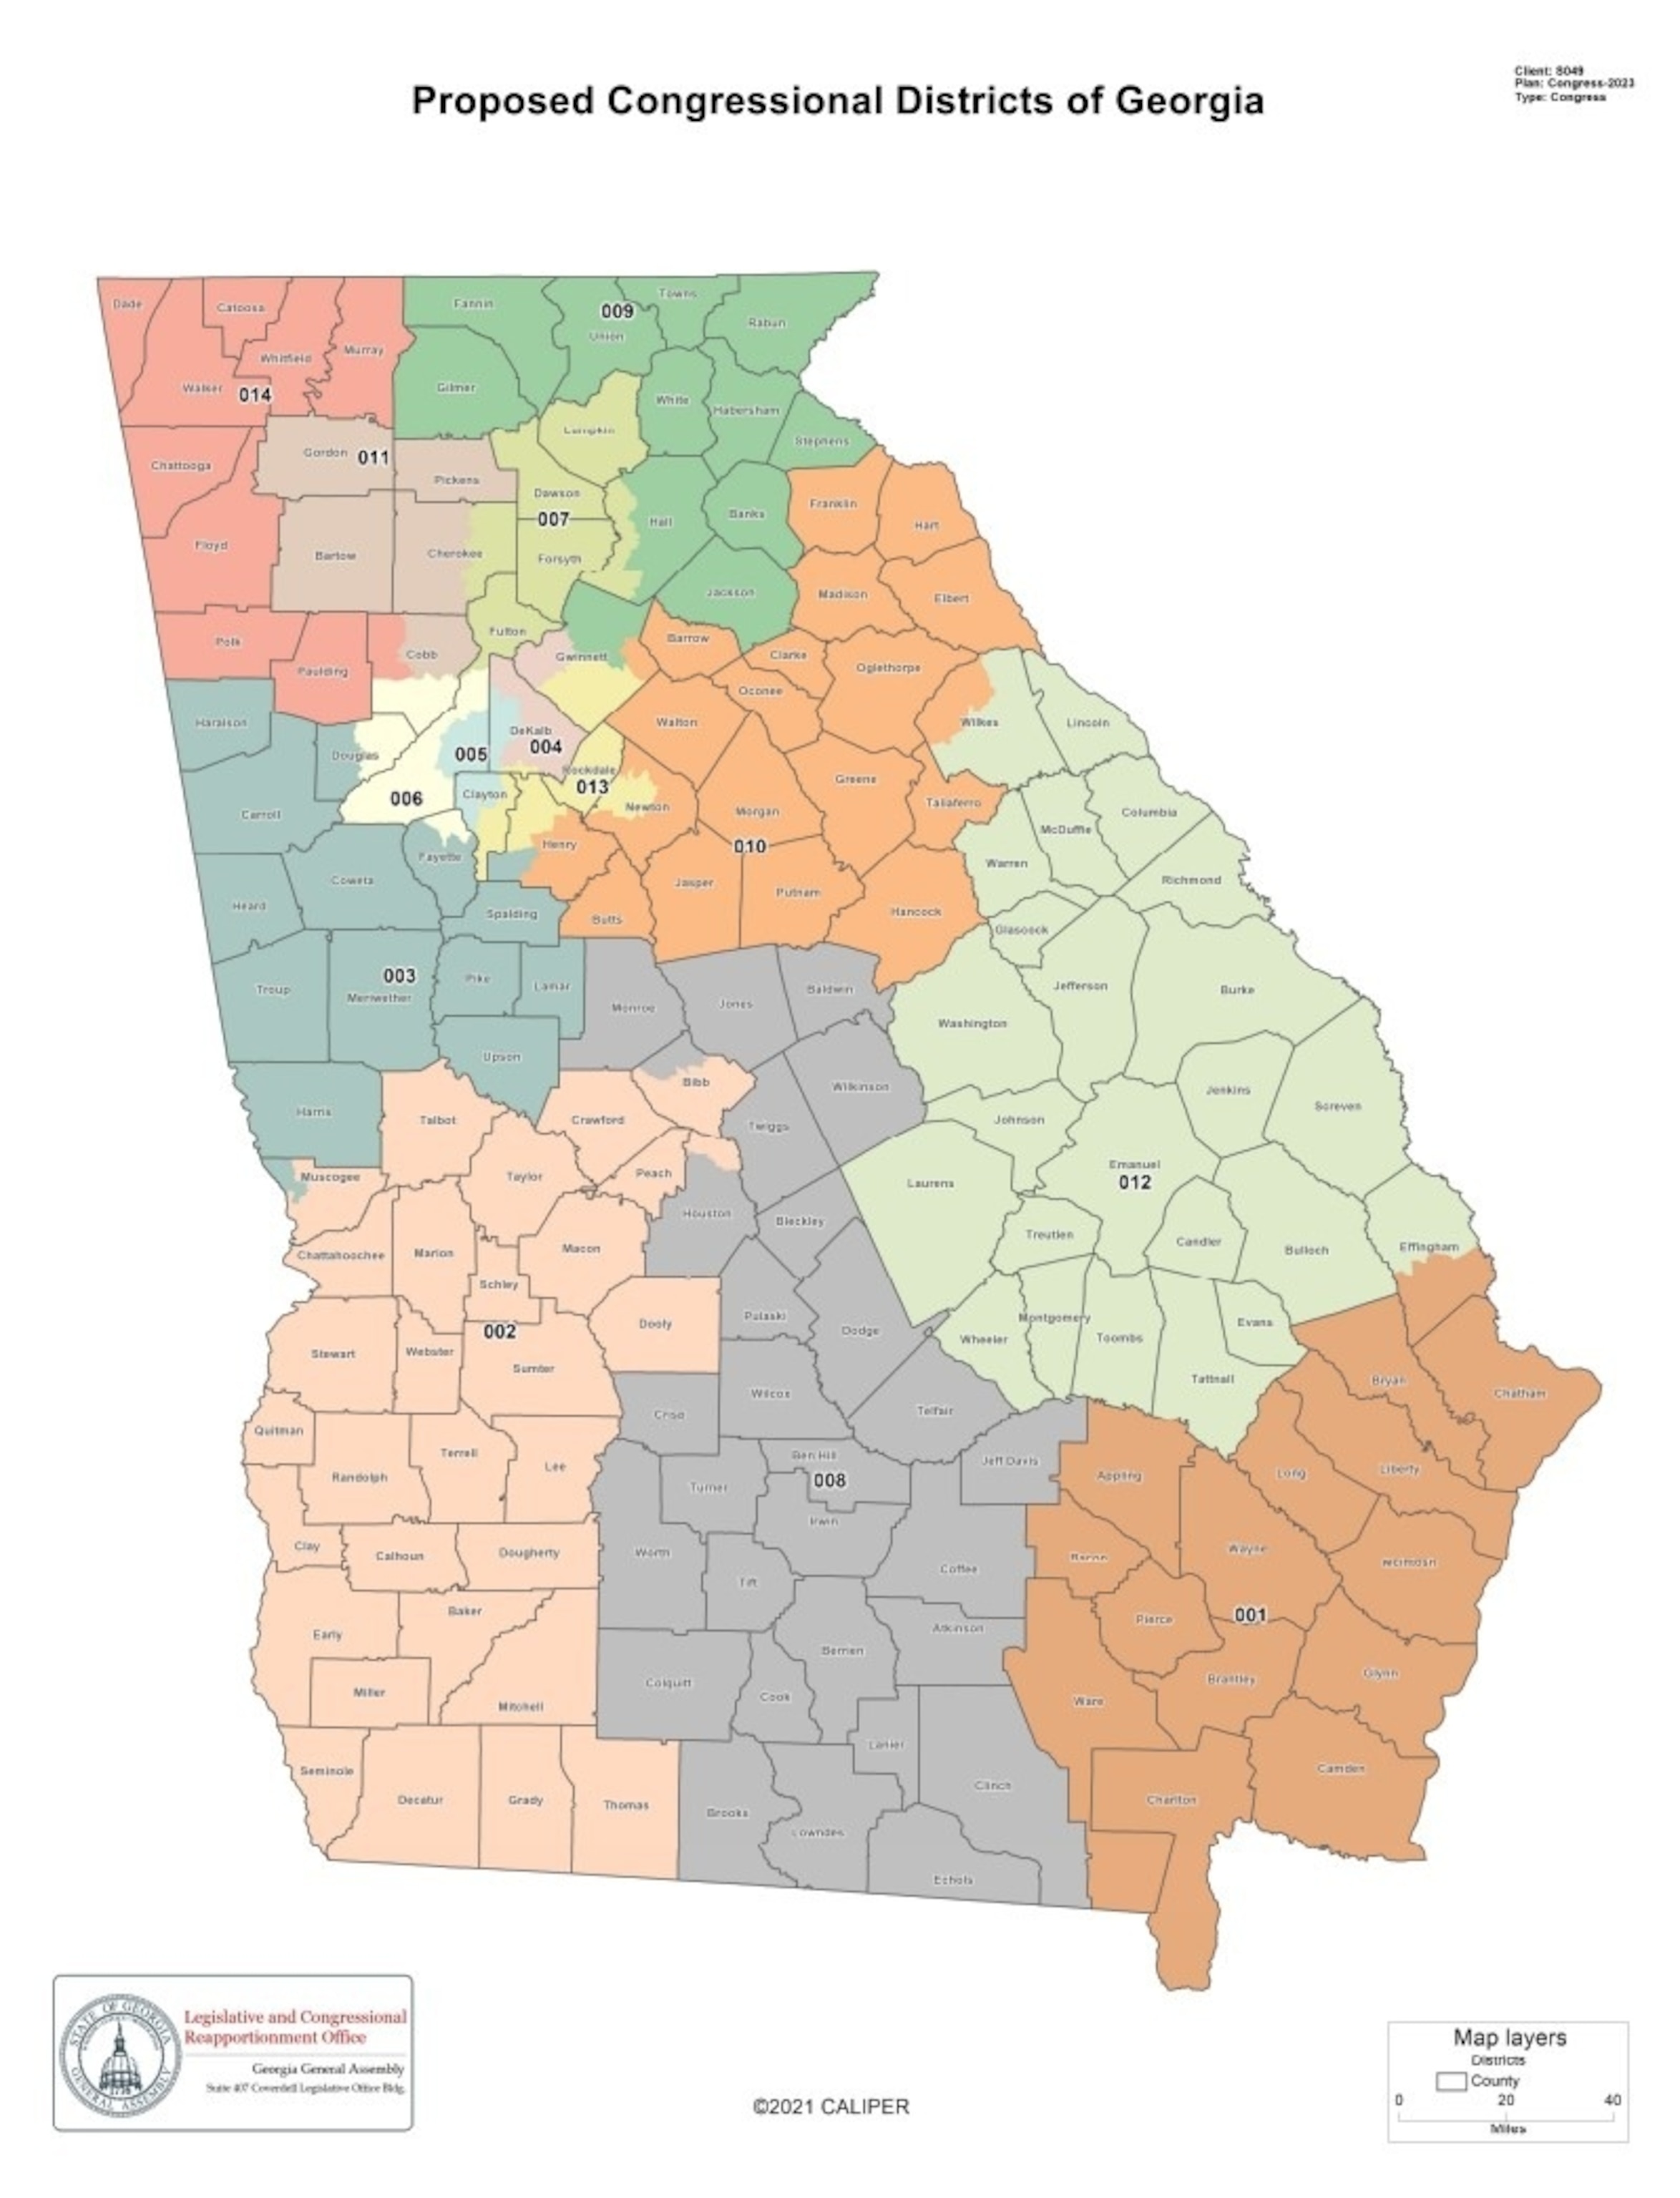 PHOTO: Proposed Congressional Districts according to the Georgia General Assembly website.